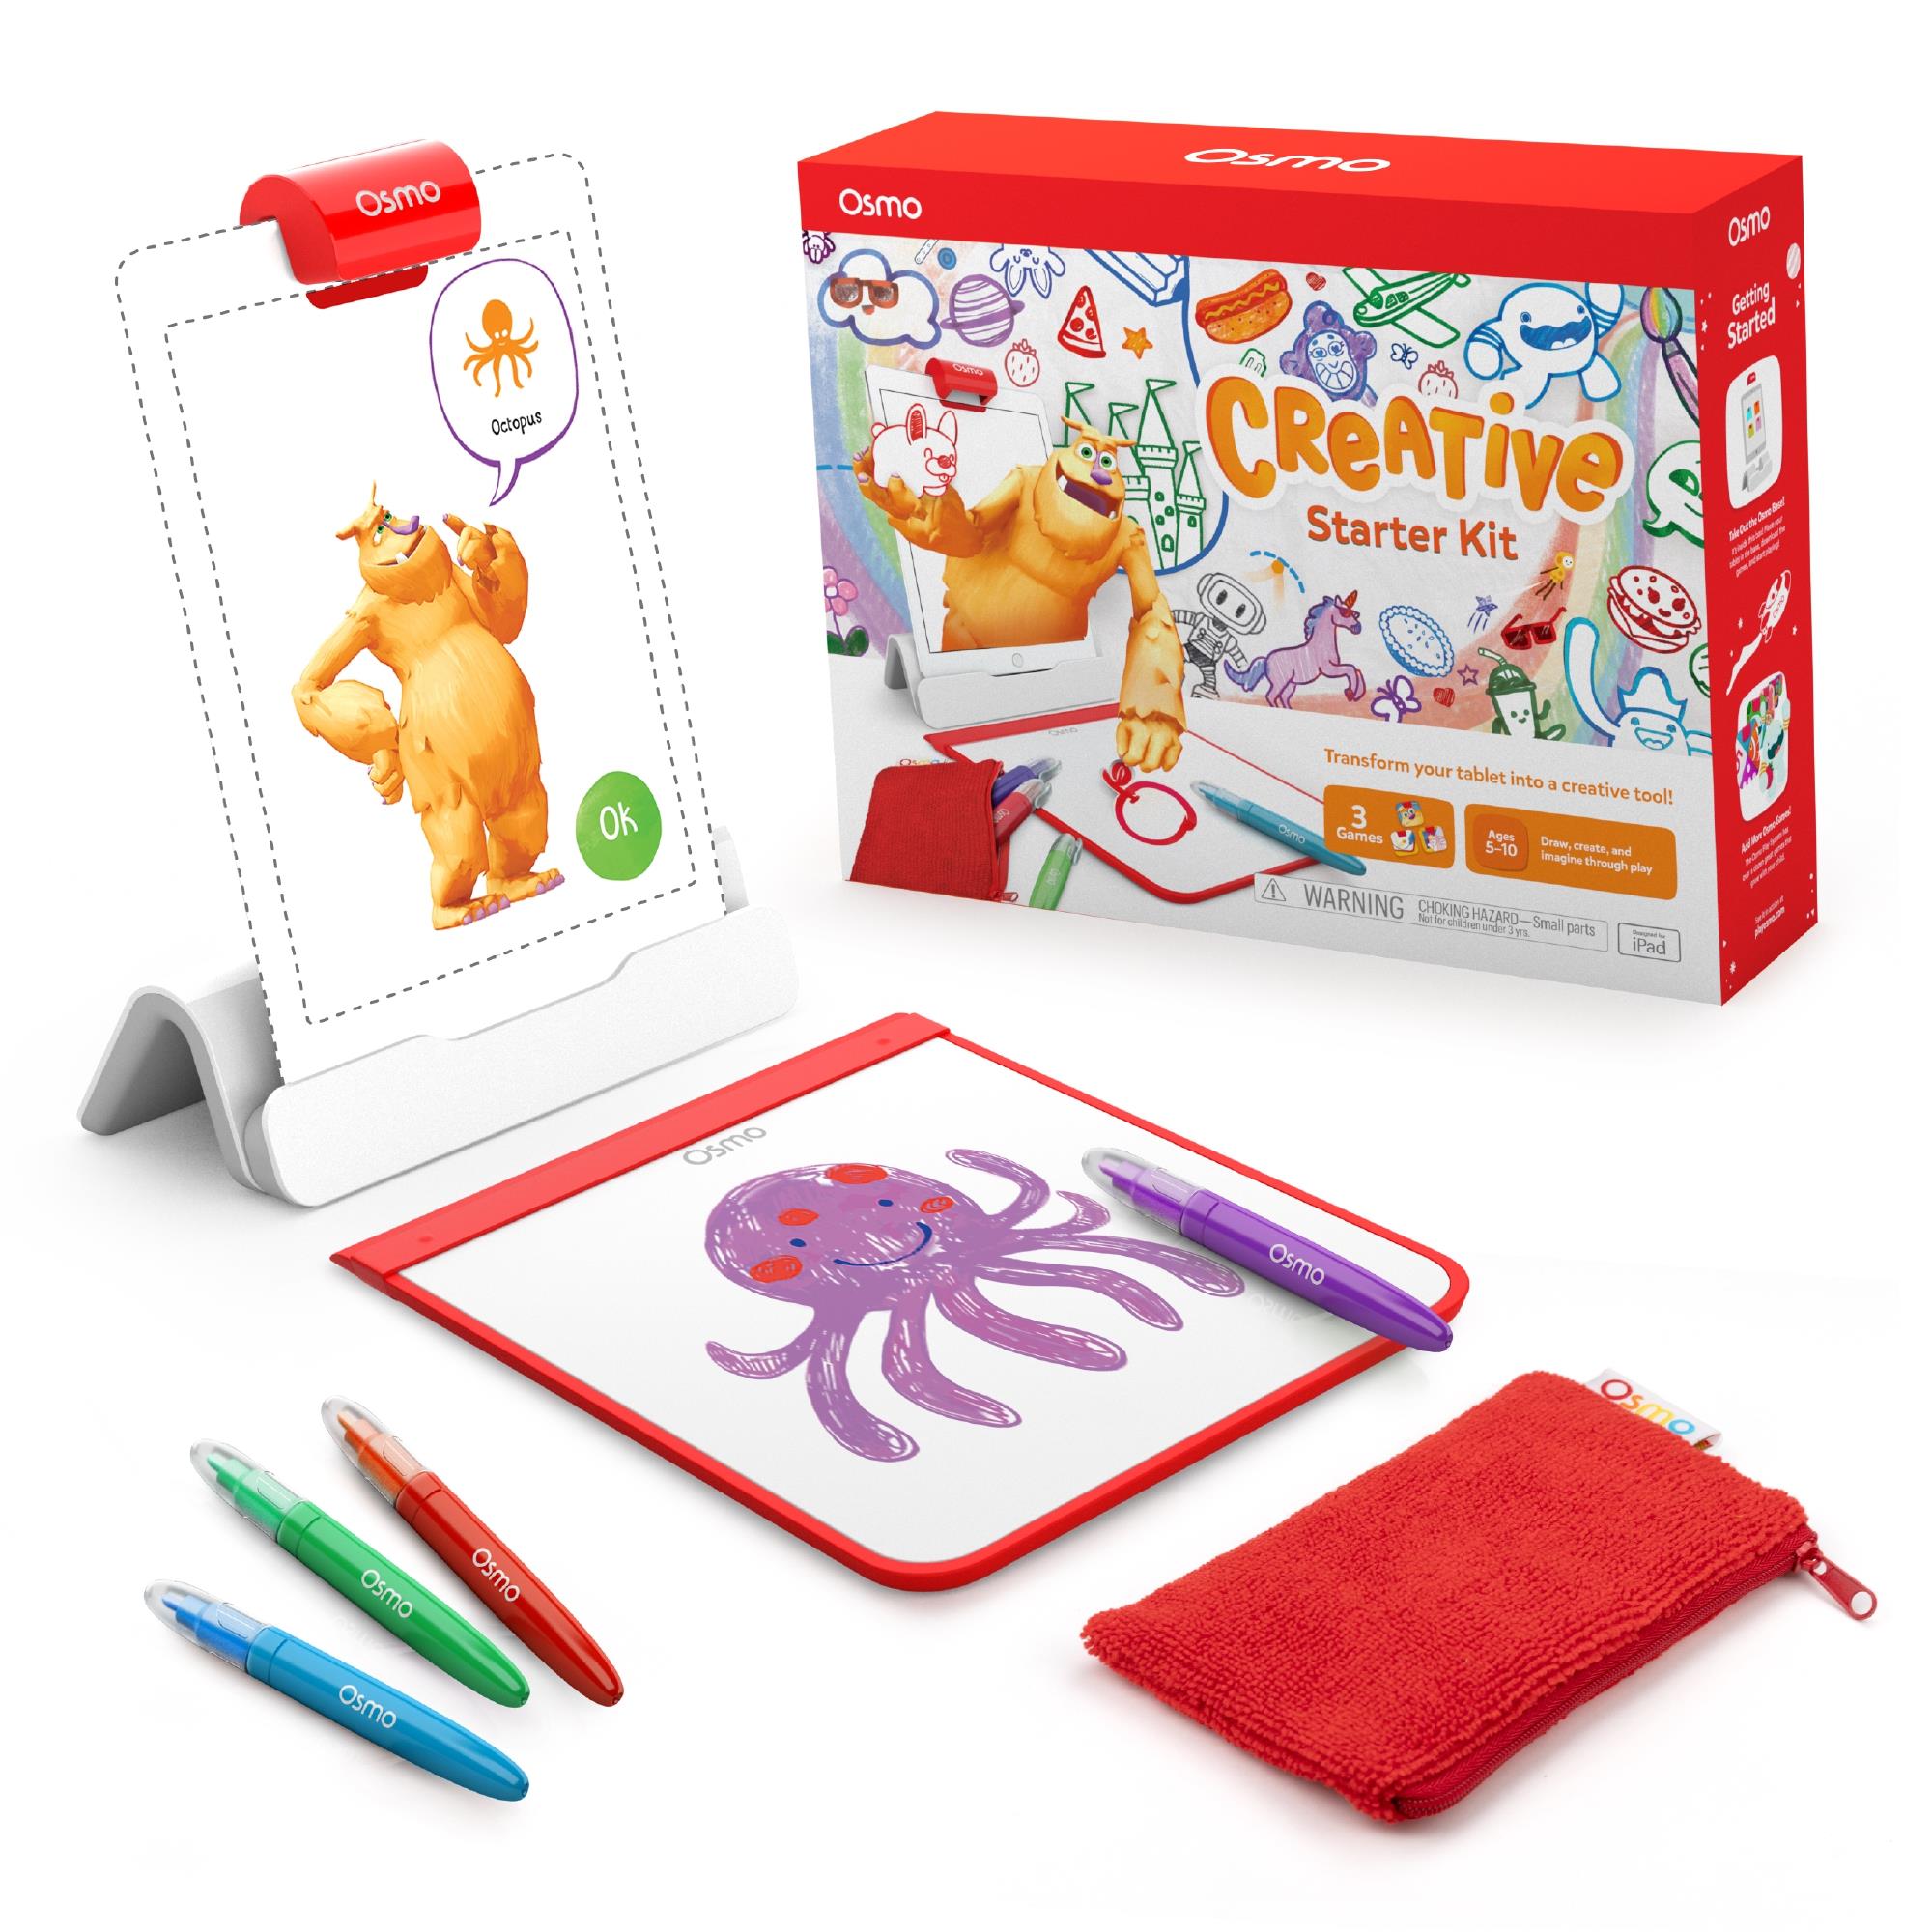 osmo creative starter kit for ipad with osmo base (ages 5-10+)